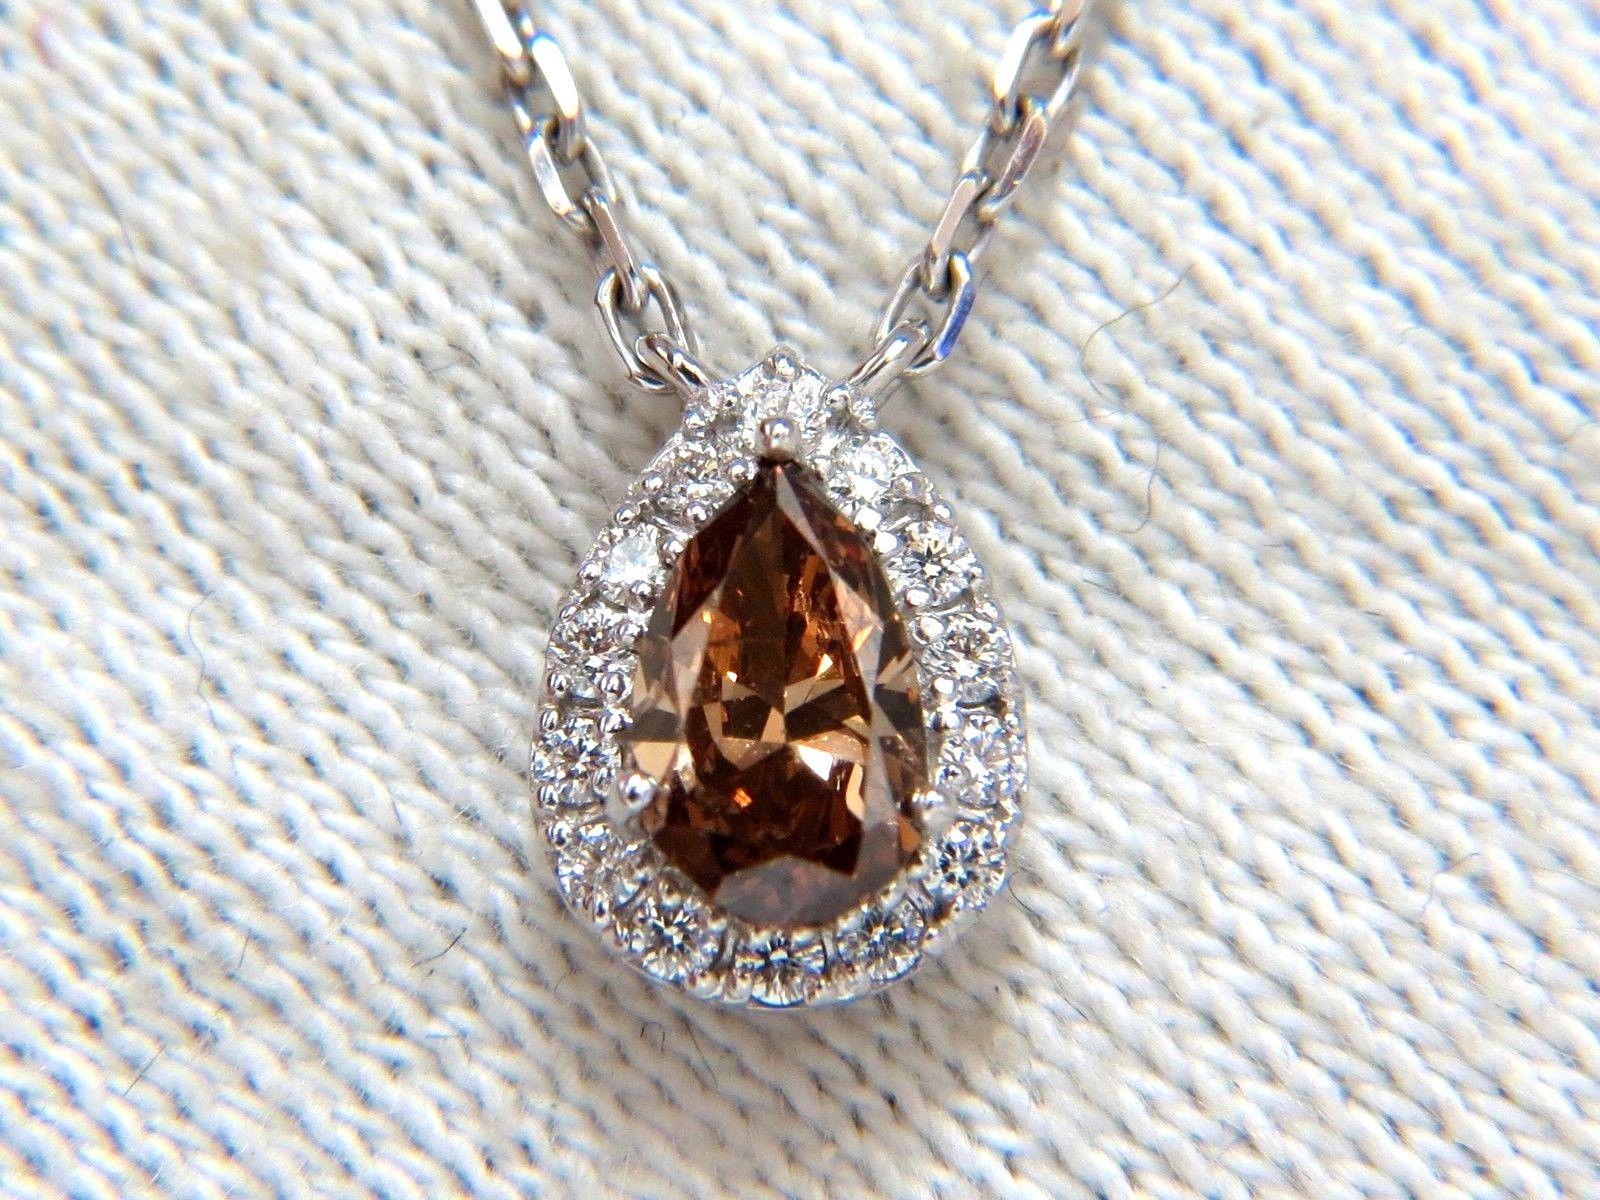 .46ct. Natural pear shaped fancy brown diamond necklace. 

Pear Brilliant cut

Vs-2  clarity

6.4 x 4.5mm

Additional 4 diamonds on chain & side diamond of halo:

.25ct. G-color Vs-2 clarity.

Pendant: 

9.6 x 6.8mm 

Necklace

16 inches in